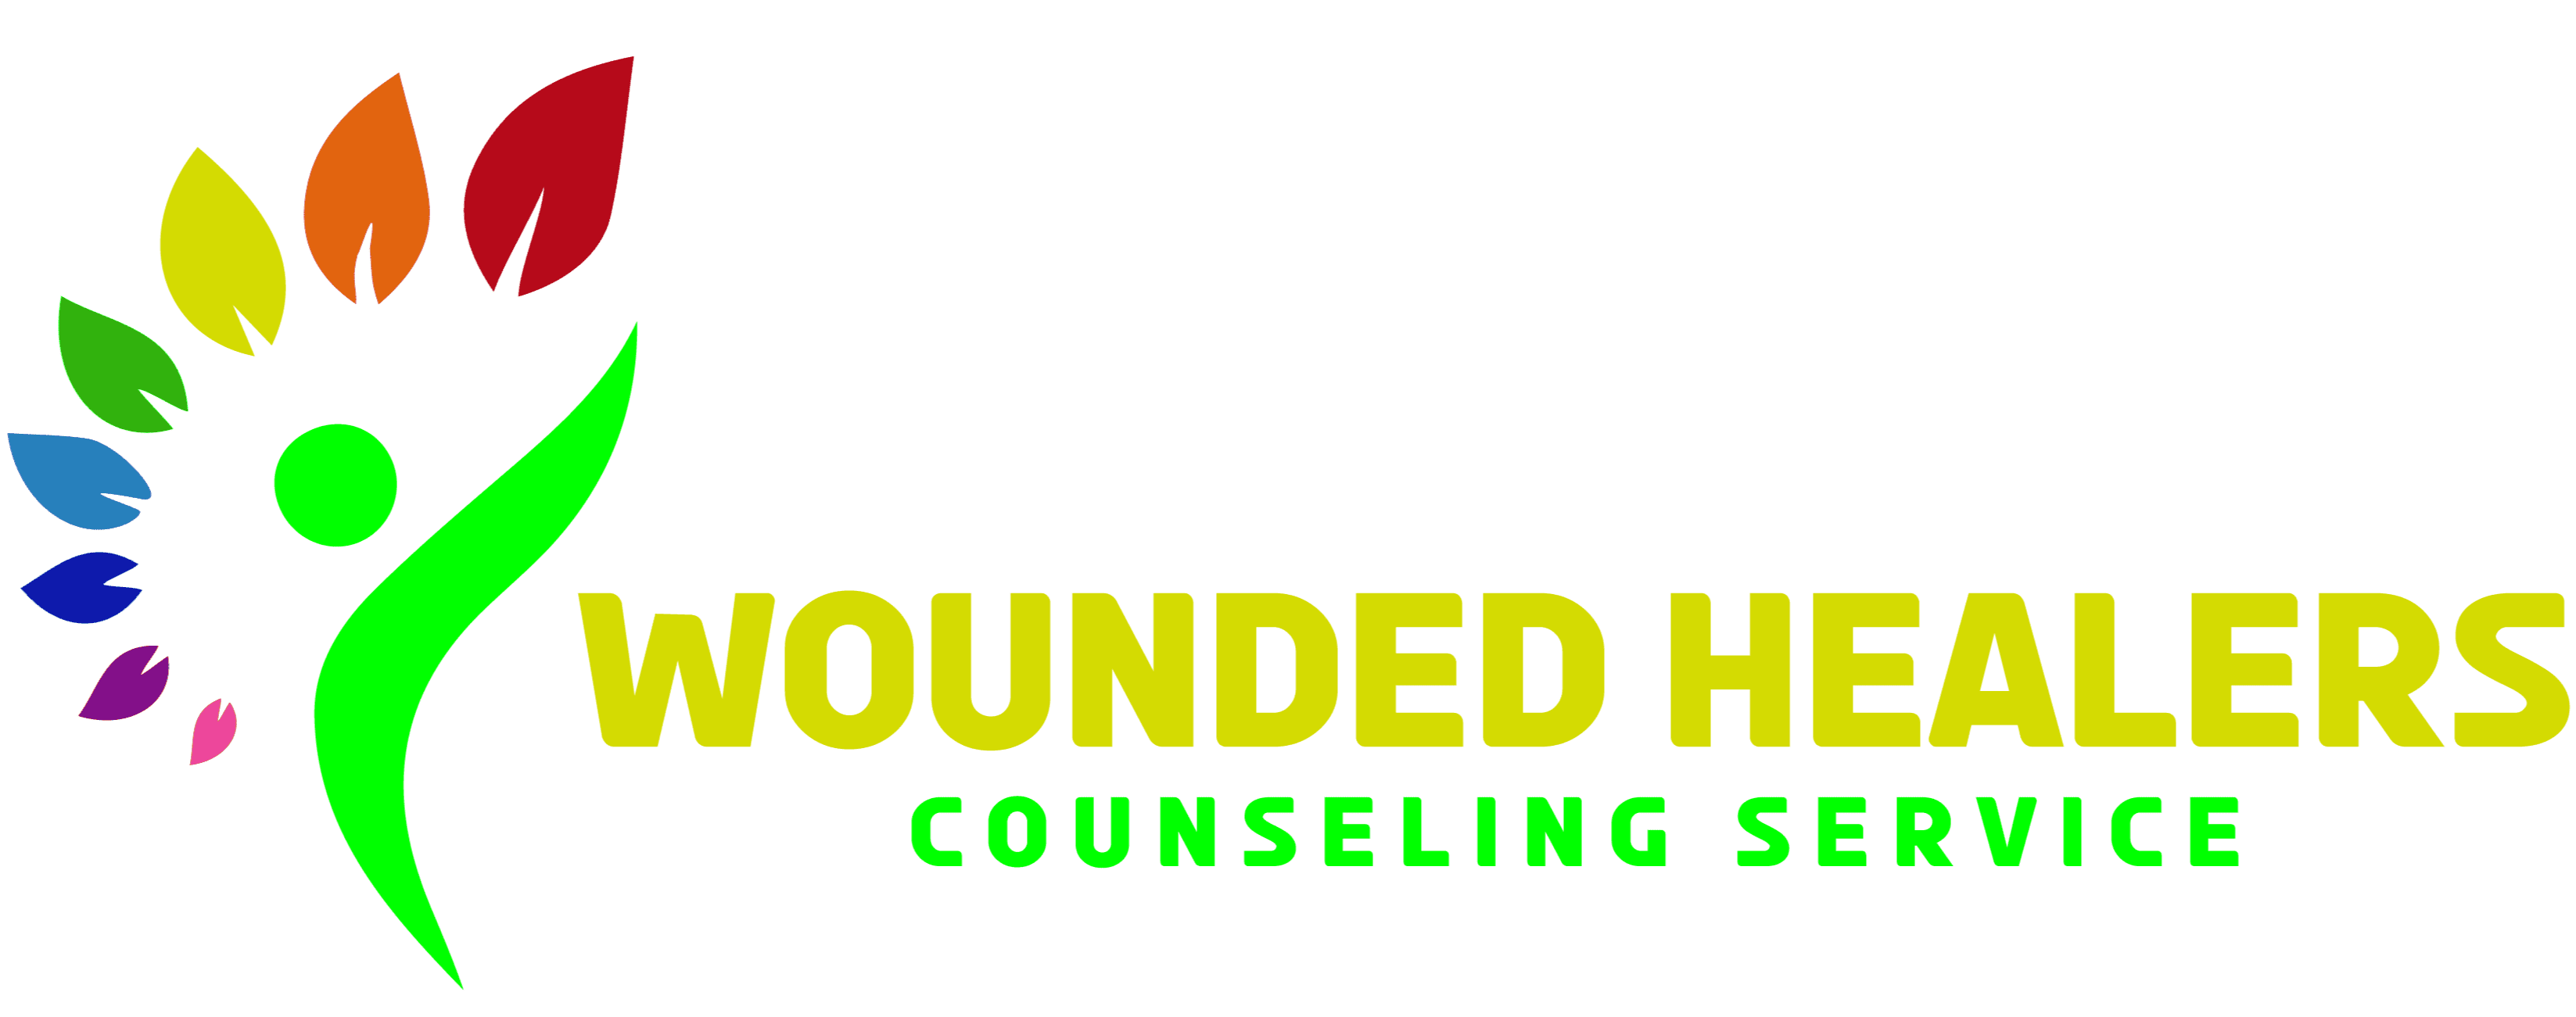 Wounded Healers Counseling Service